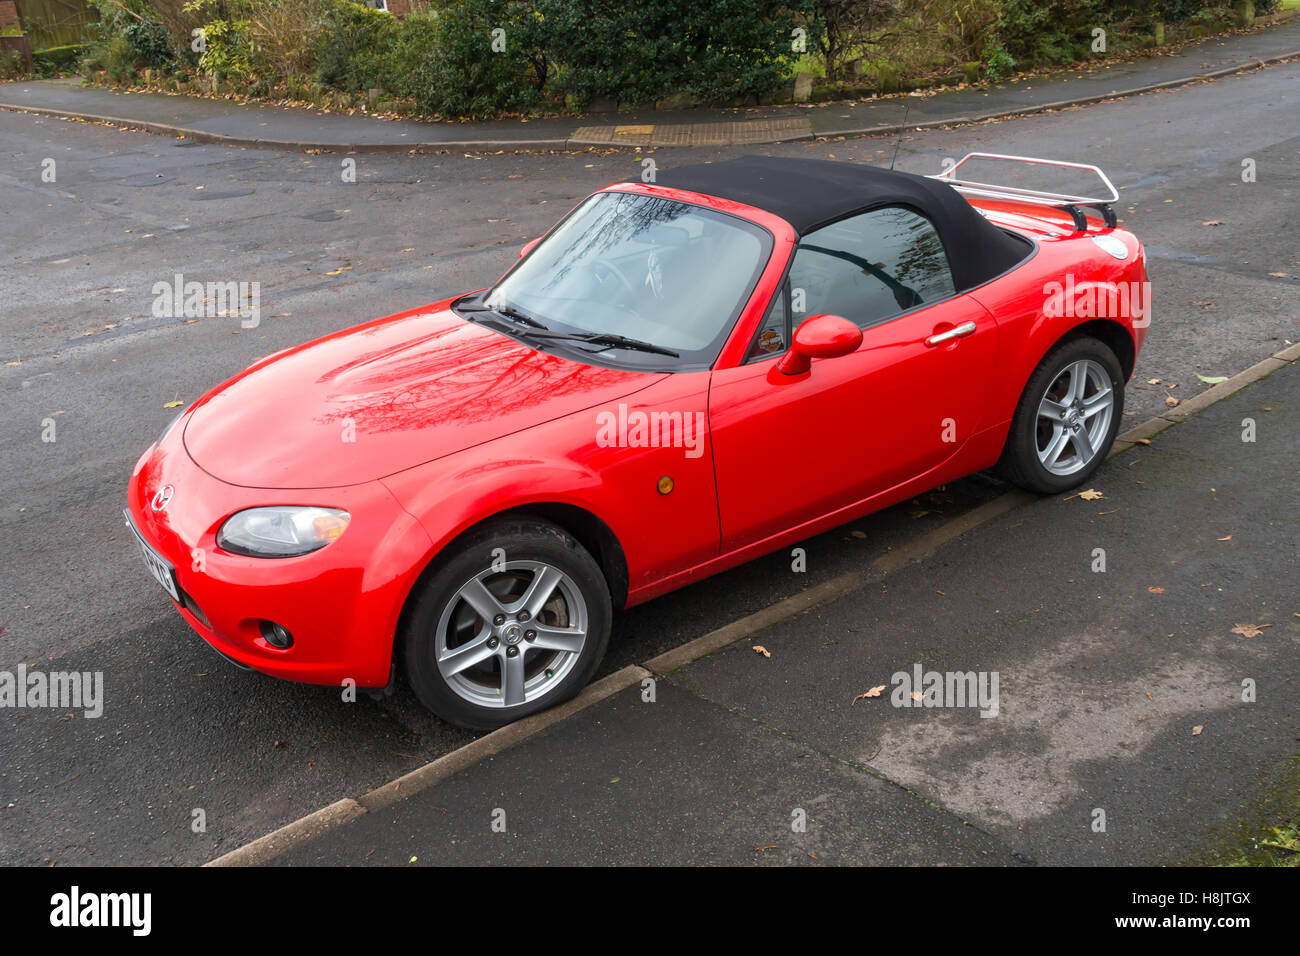 A 2006 red Mazda MX5 sports roadster motor car Stock Photo